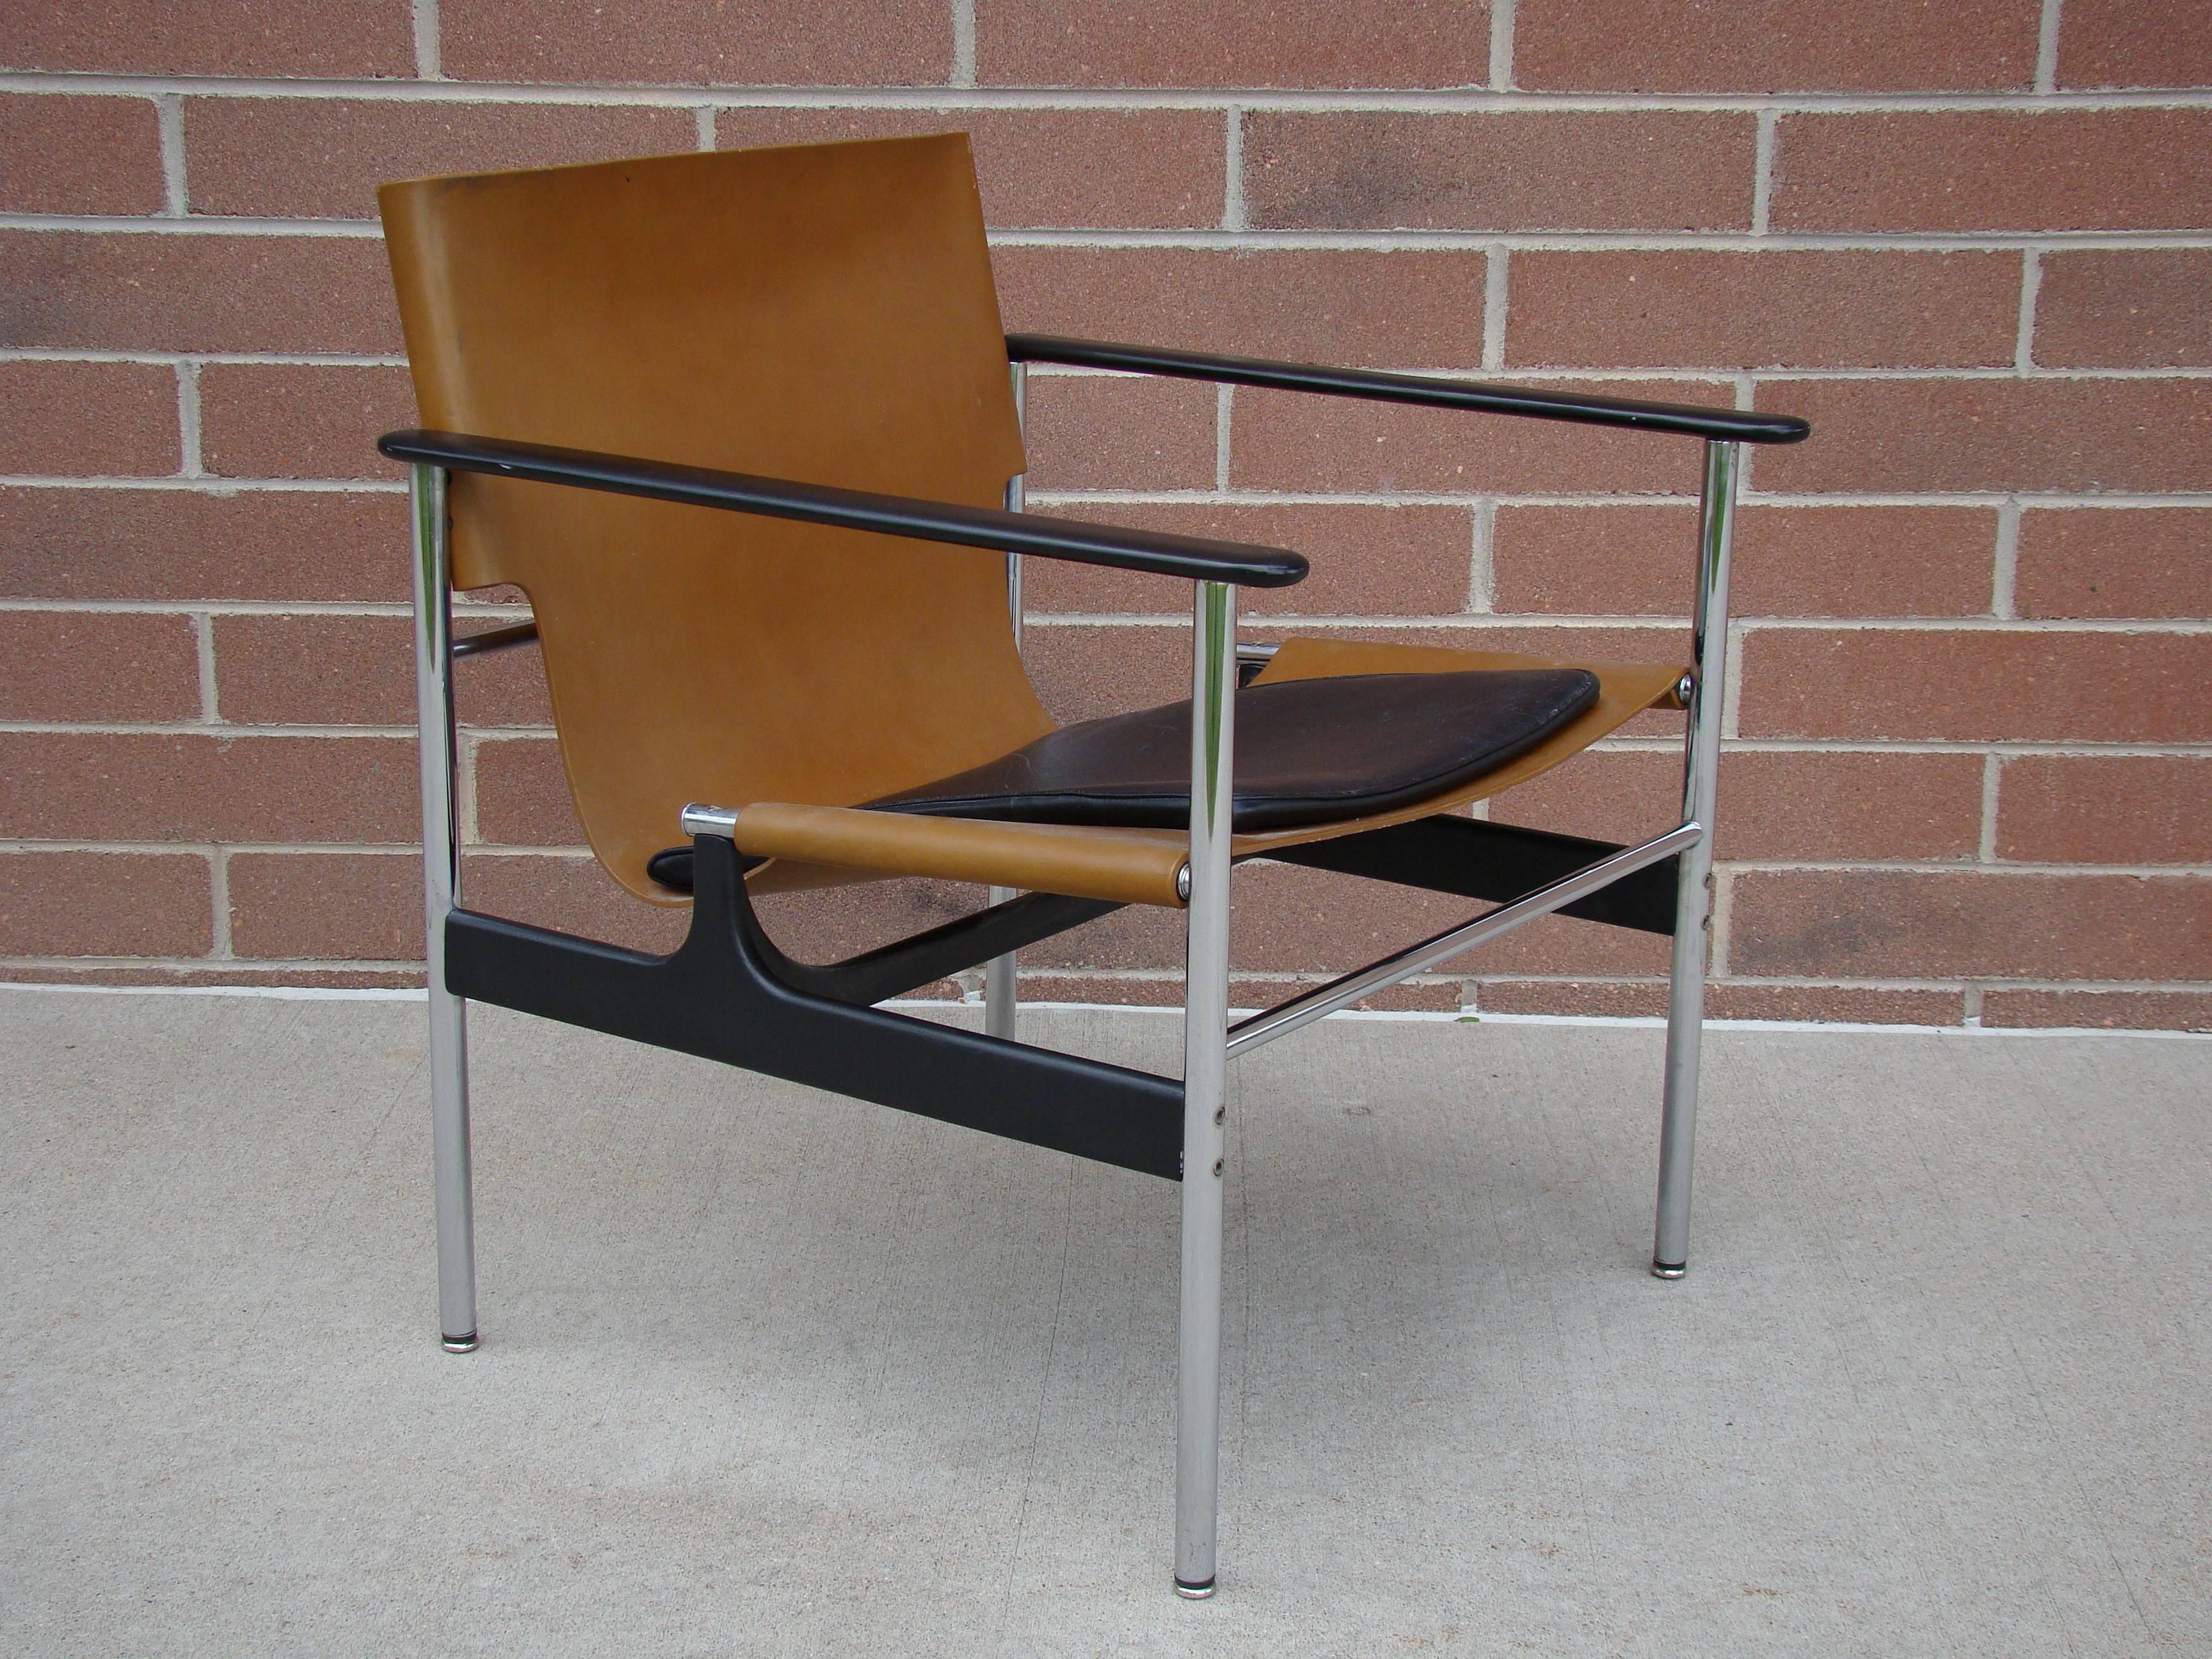 SATURDAY SALE:Charles Pollack designed this iconic chair often referred to as the 